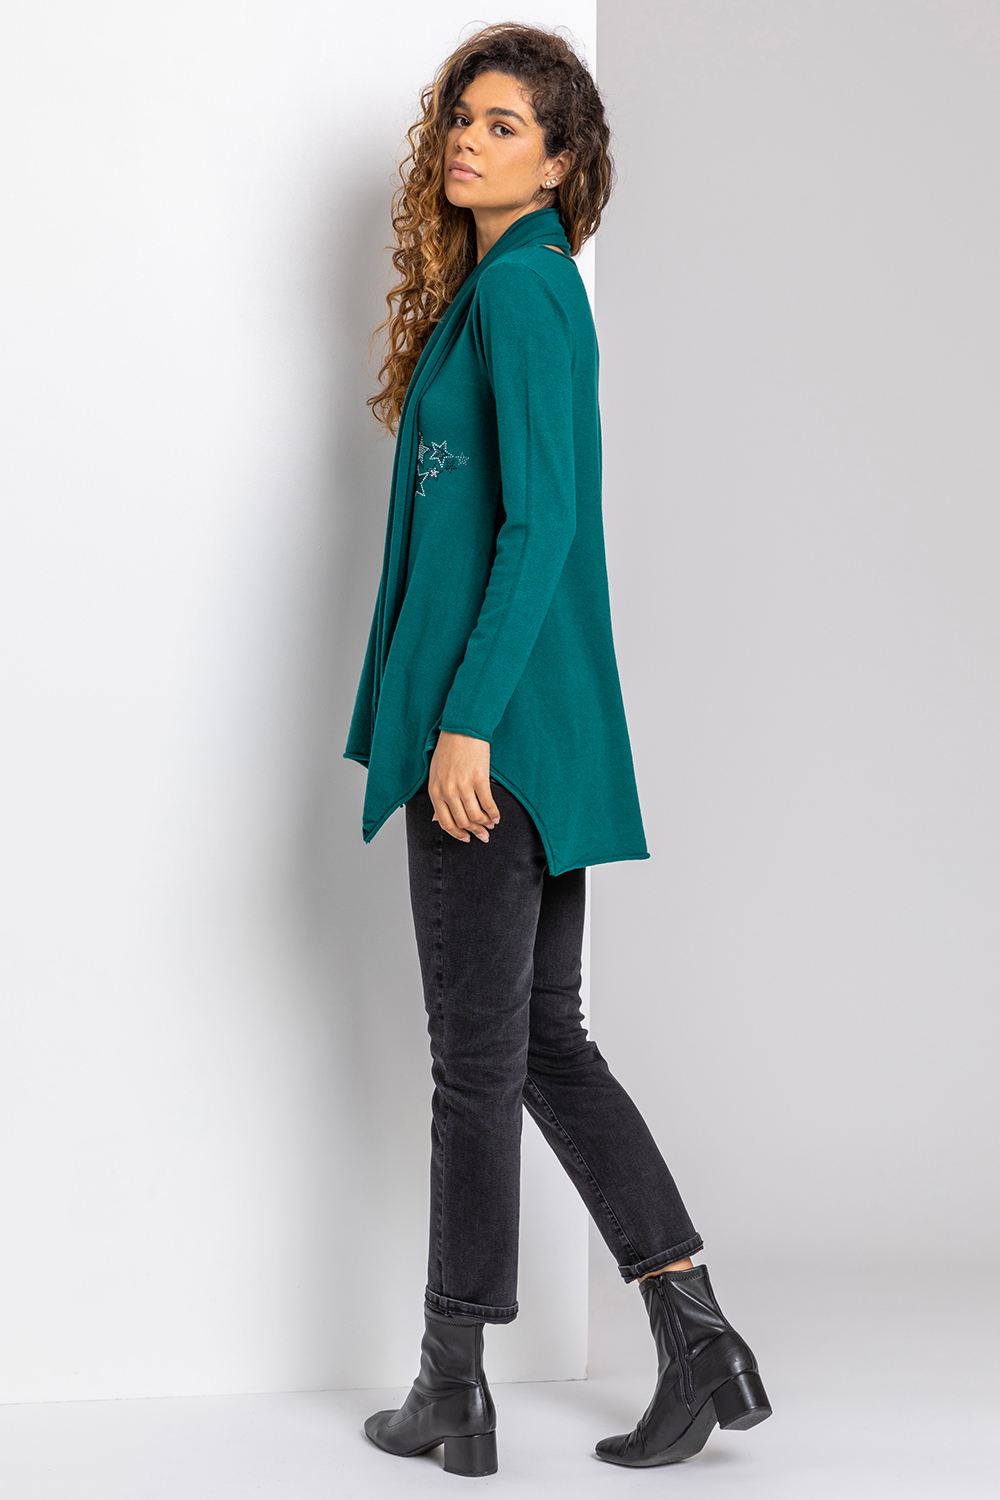 Green Star Print Embellished Tunic with Scarf, Image 2 of 4